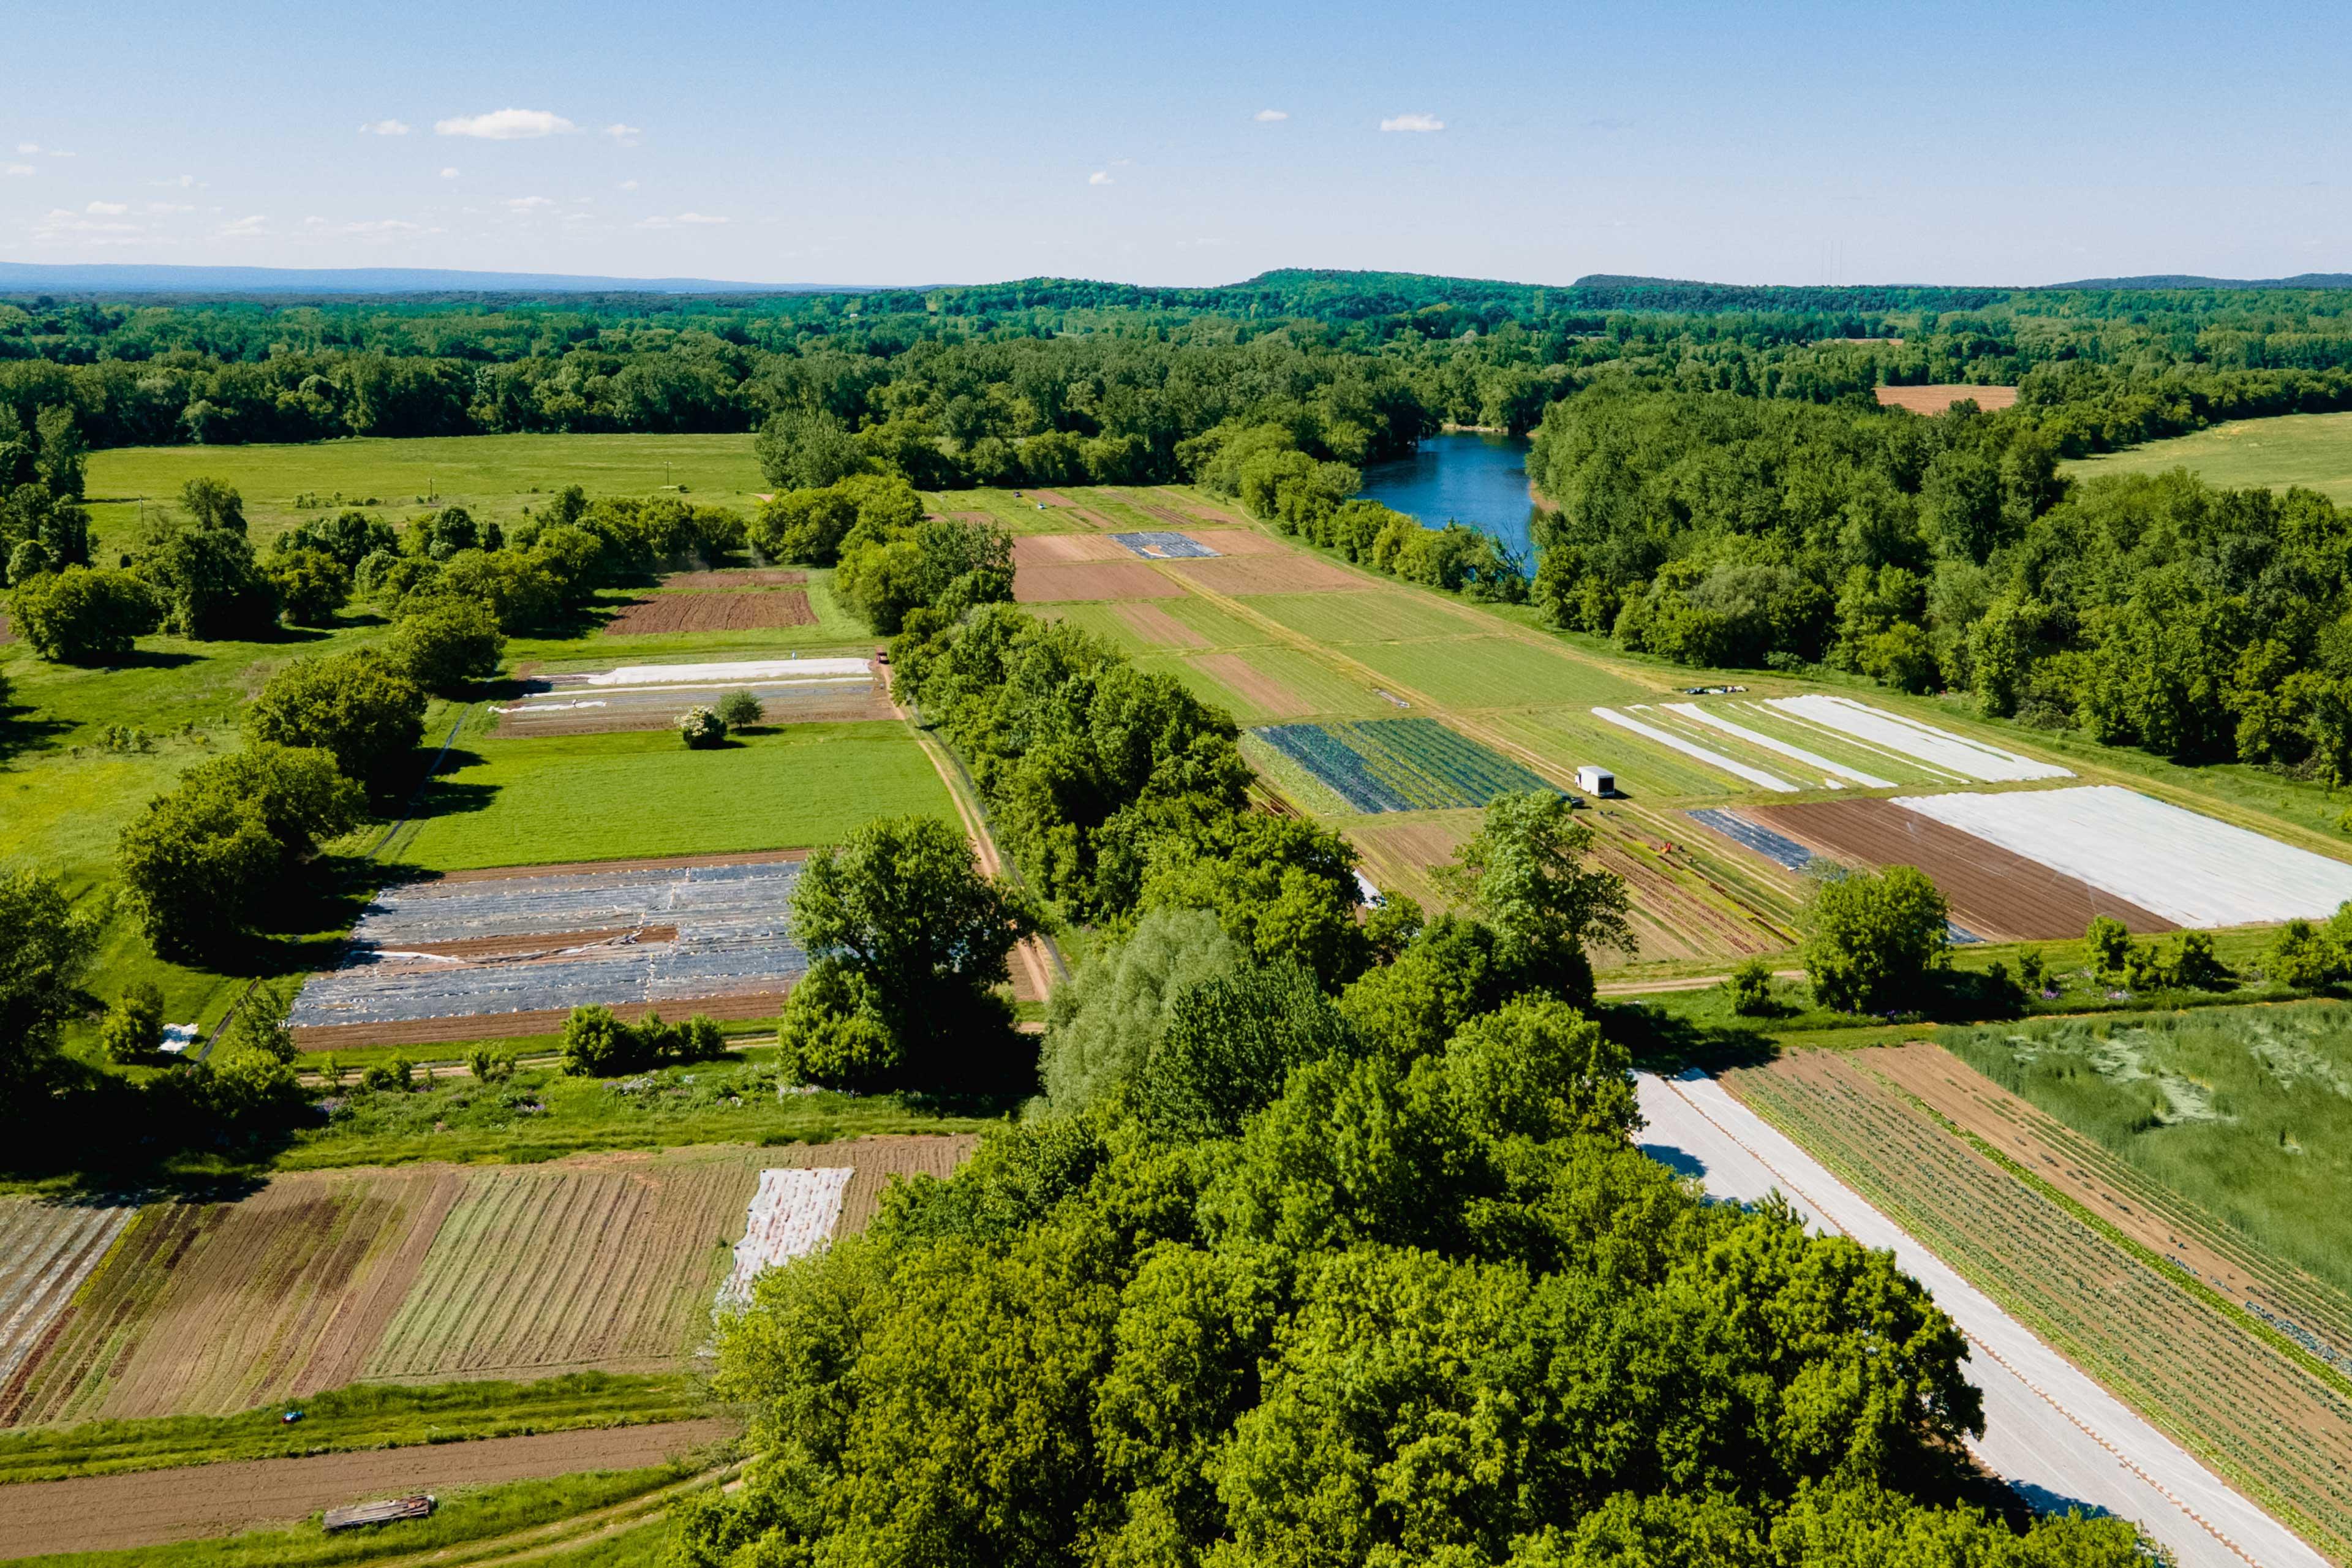 Intervale Community Farm and Digger's Mirth as seen from overhead